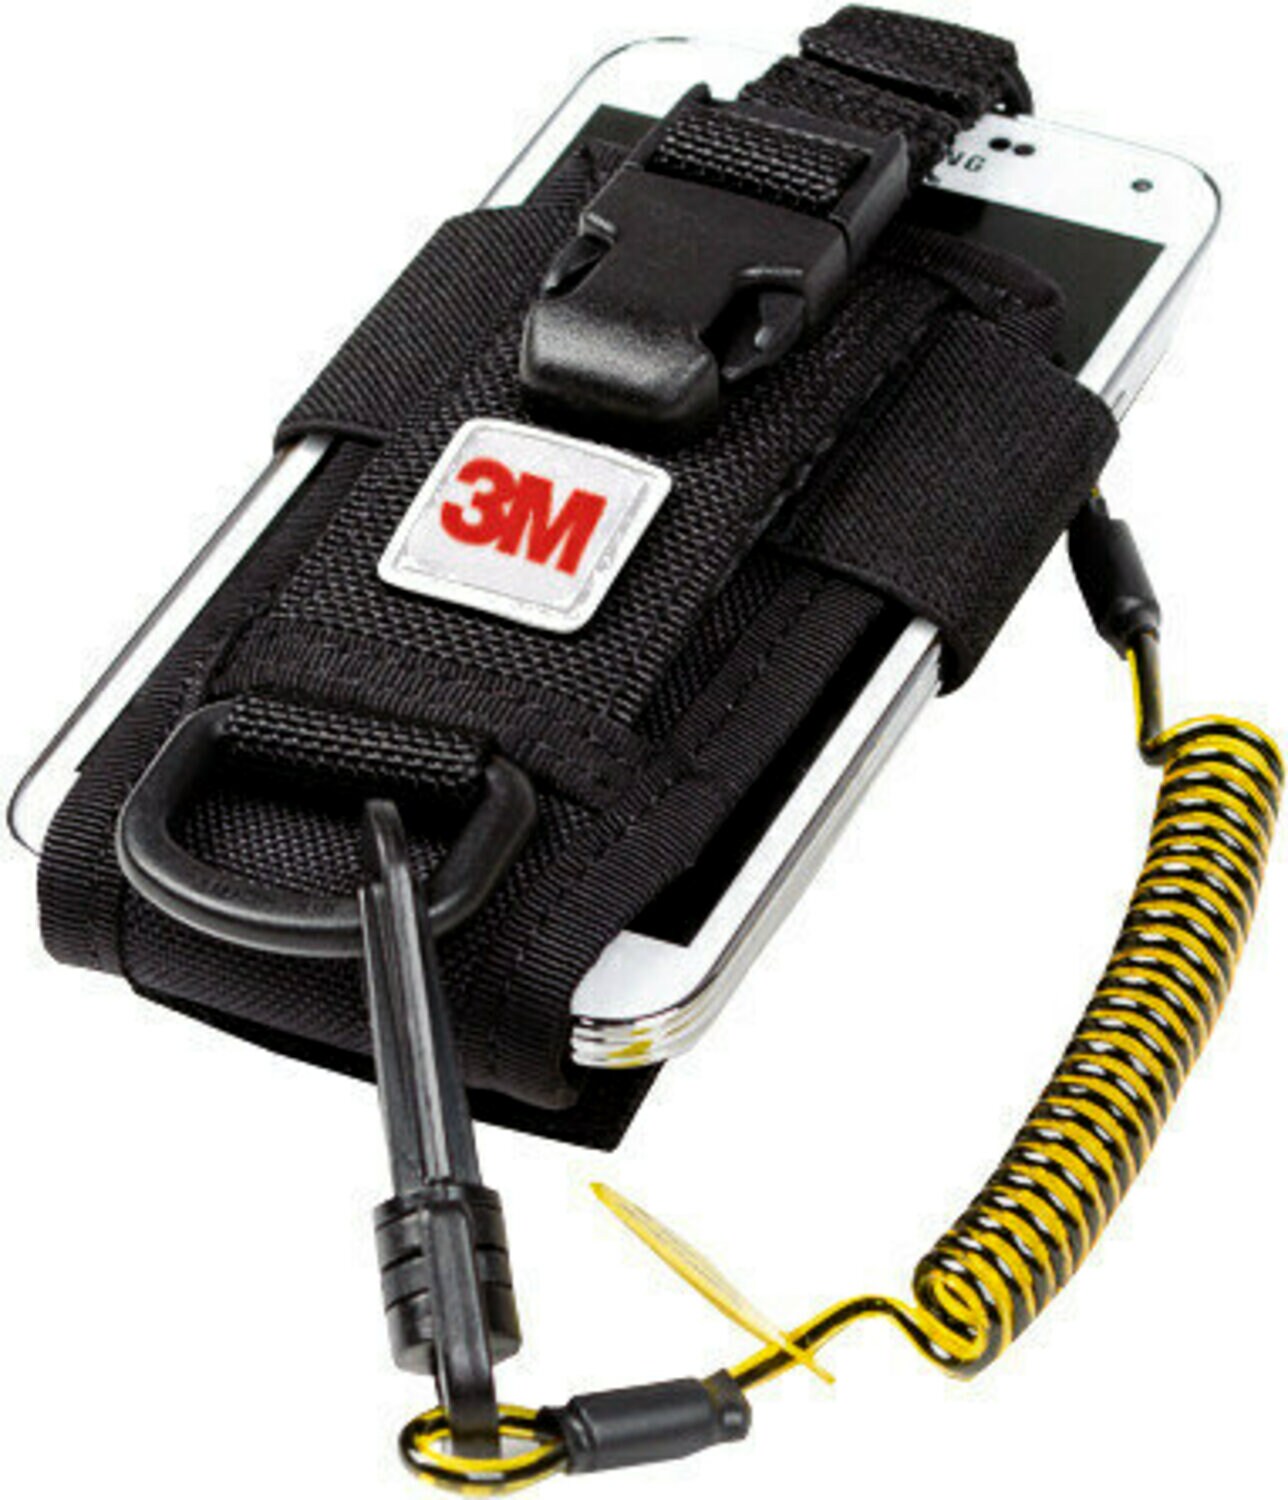 7100157155 - 3M DBI-SALA Adjustable Radio/Cell Phone Holster, Clip2Loop Coil
Tether, Micro D-Ring 1500089, 1 EA